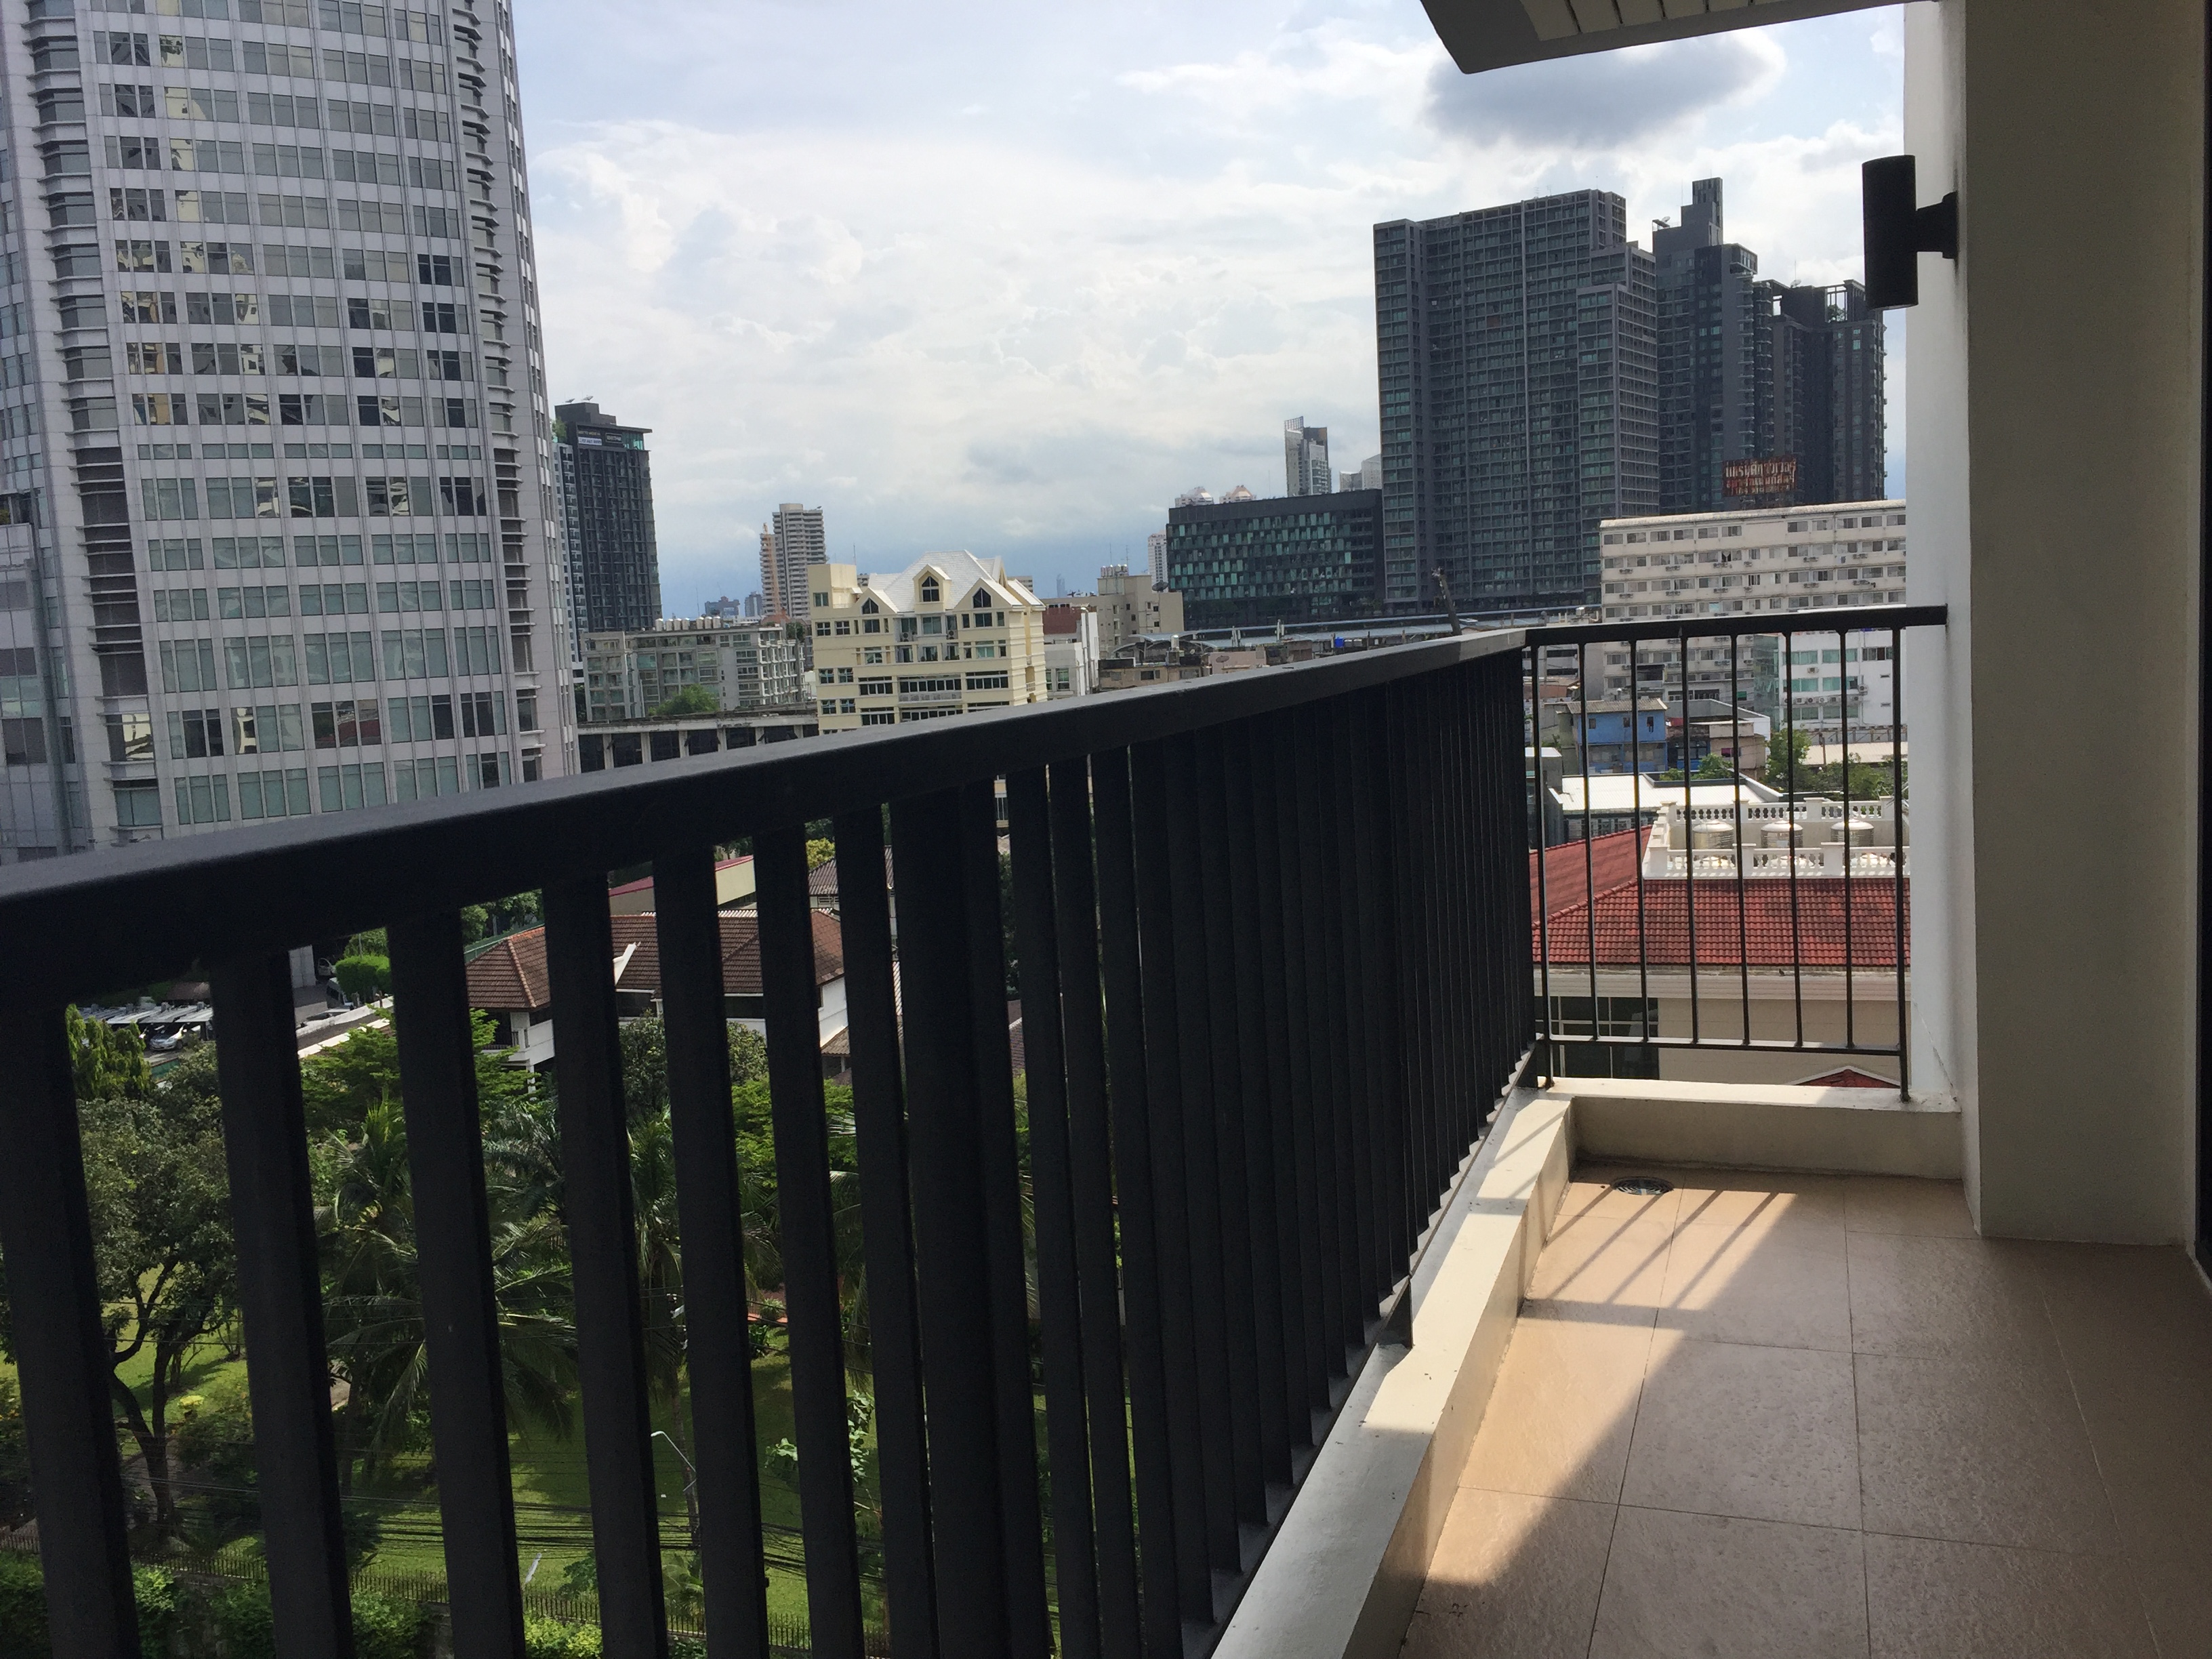 Condo for rent/sale 3 bedroom 119 sq.m. Corner room, Nice view, Walk to Thong lor station.